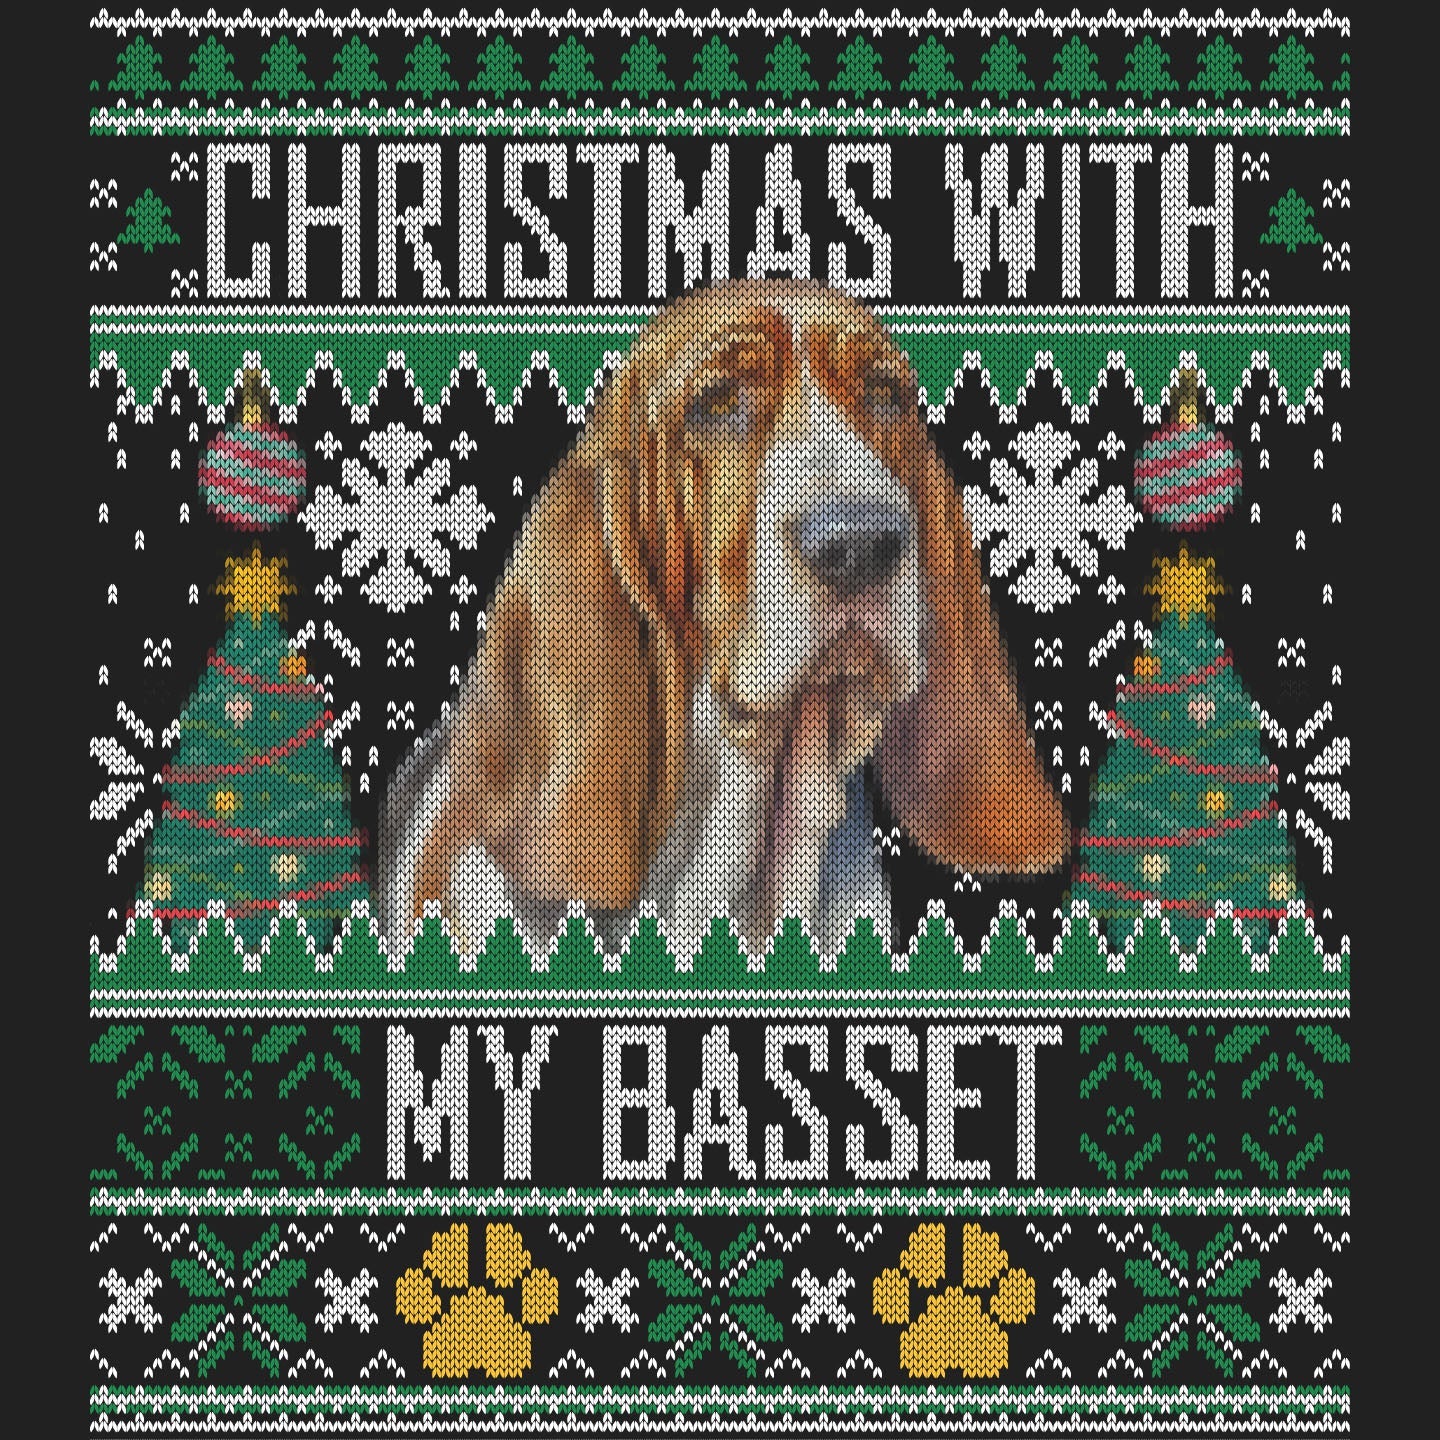 Ugly Sweater Christmas with My Basset Hound - Women's V-Neck Long Sleeve T-Shirt